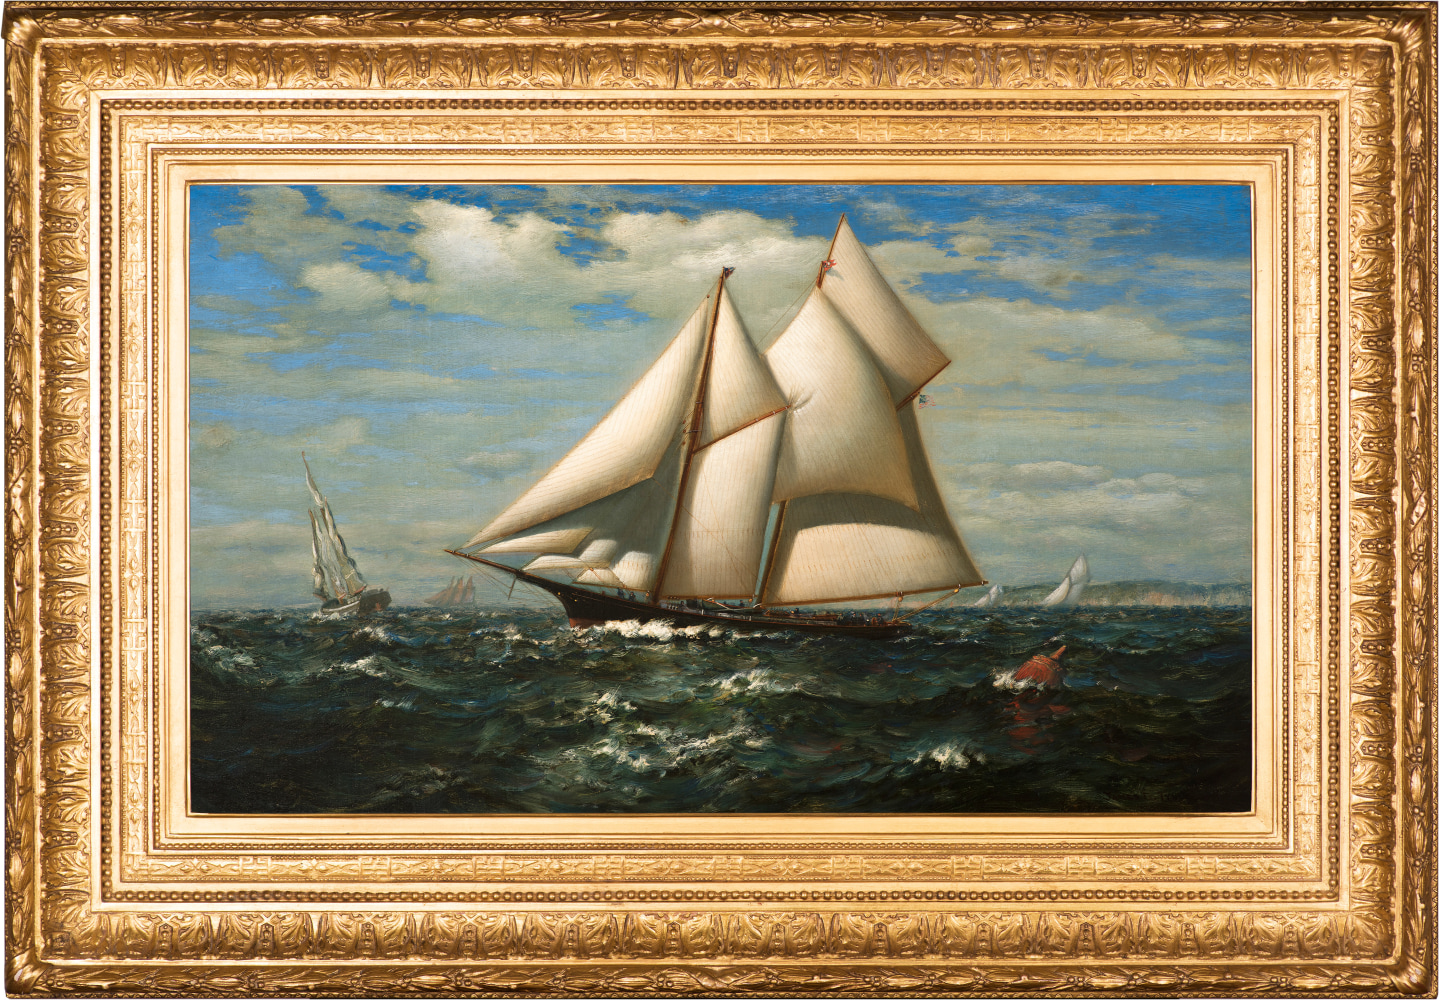 James Gale Tyler (1855–1931), The Yacht, Water Witch, oil on canvas, 18 x 30 in., signed lower right: James G. Tyler (framed)